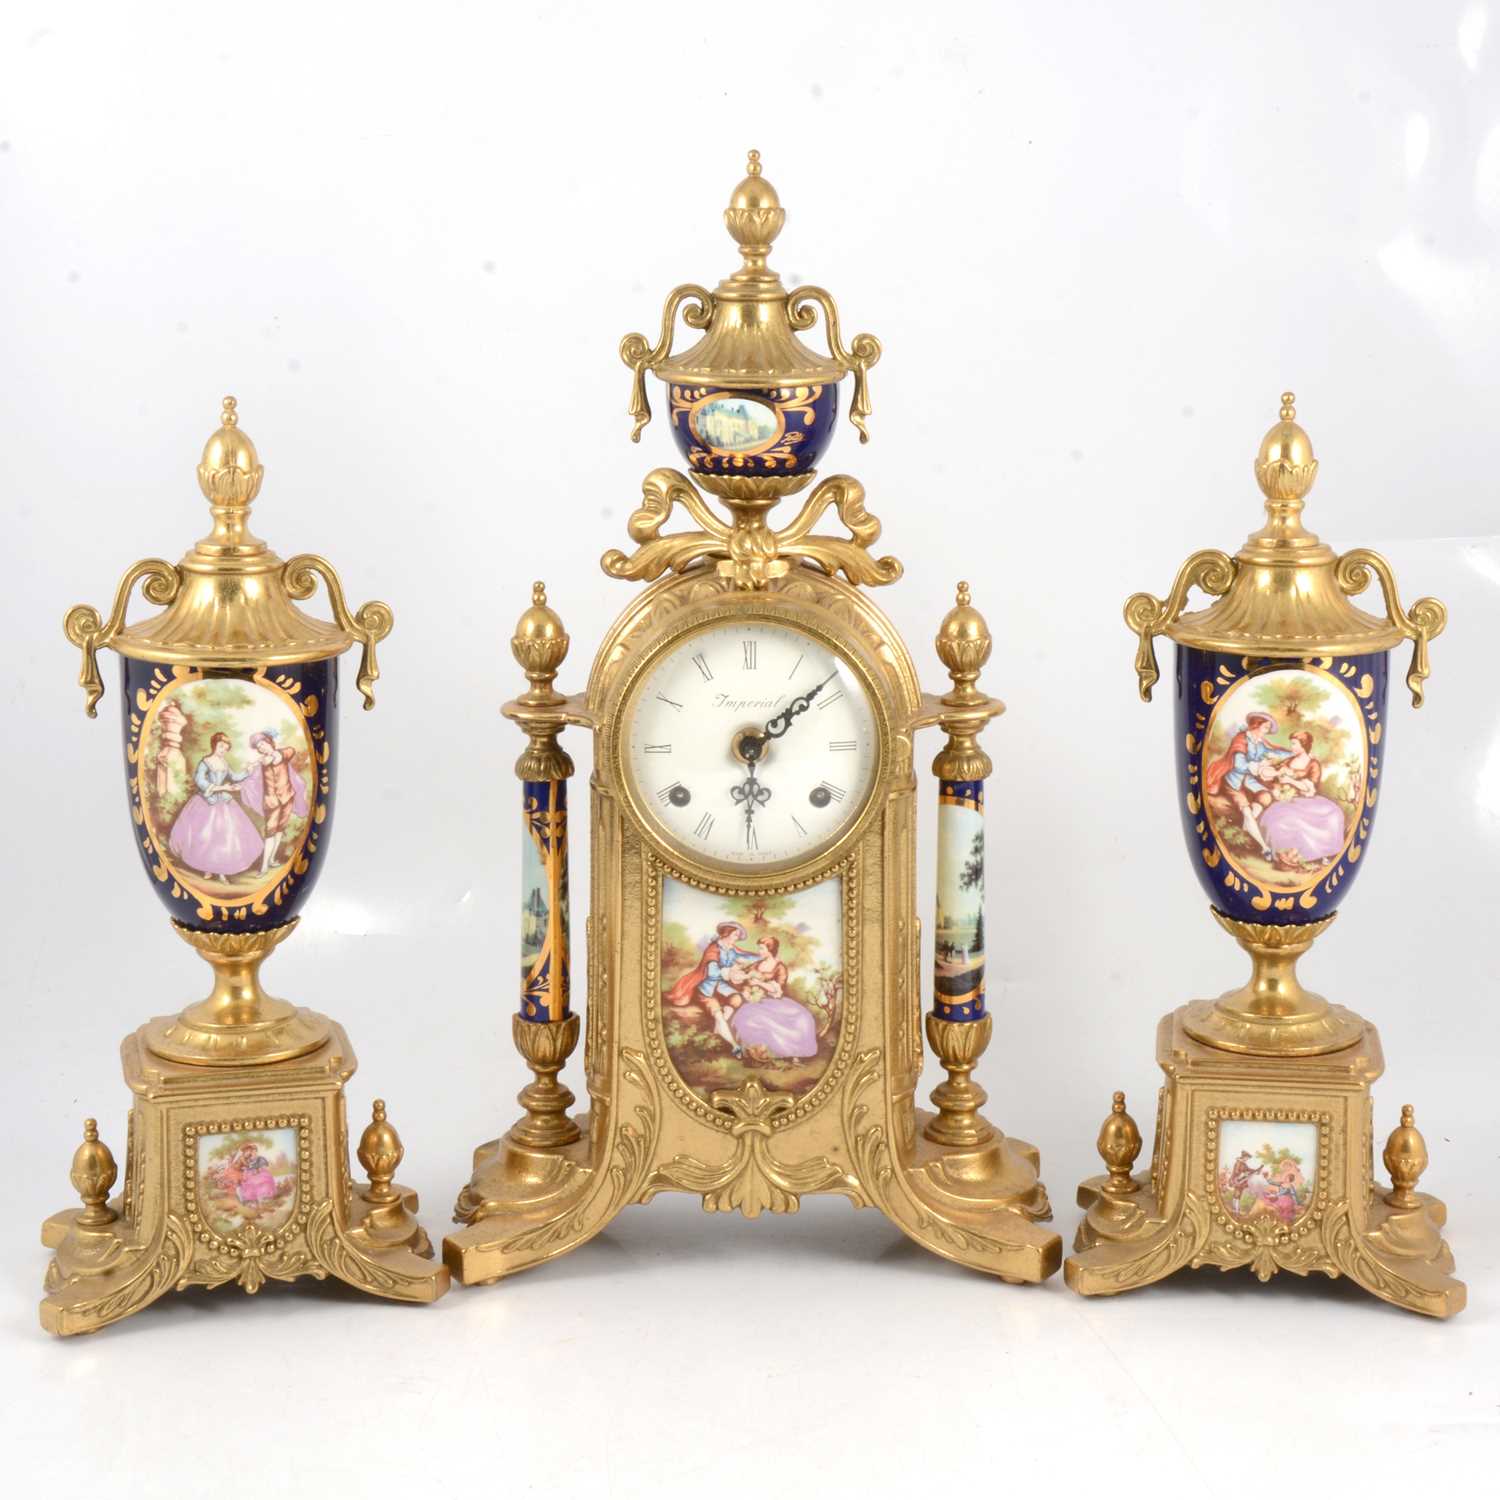 Lot 104 - Reproduction French mantle clock garniture